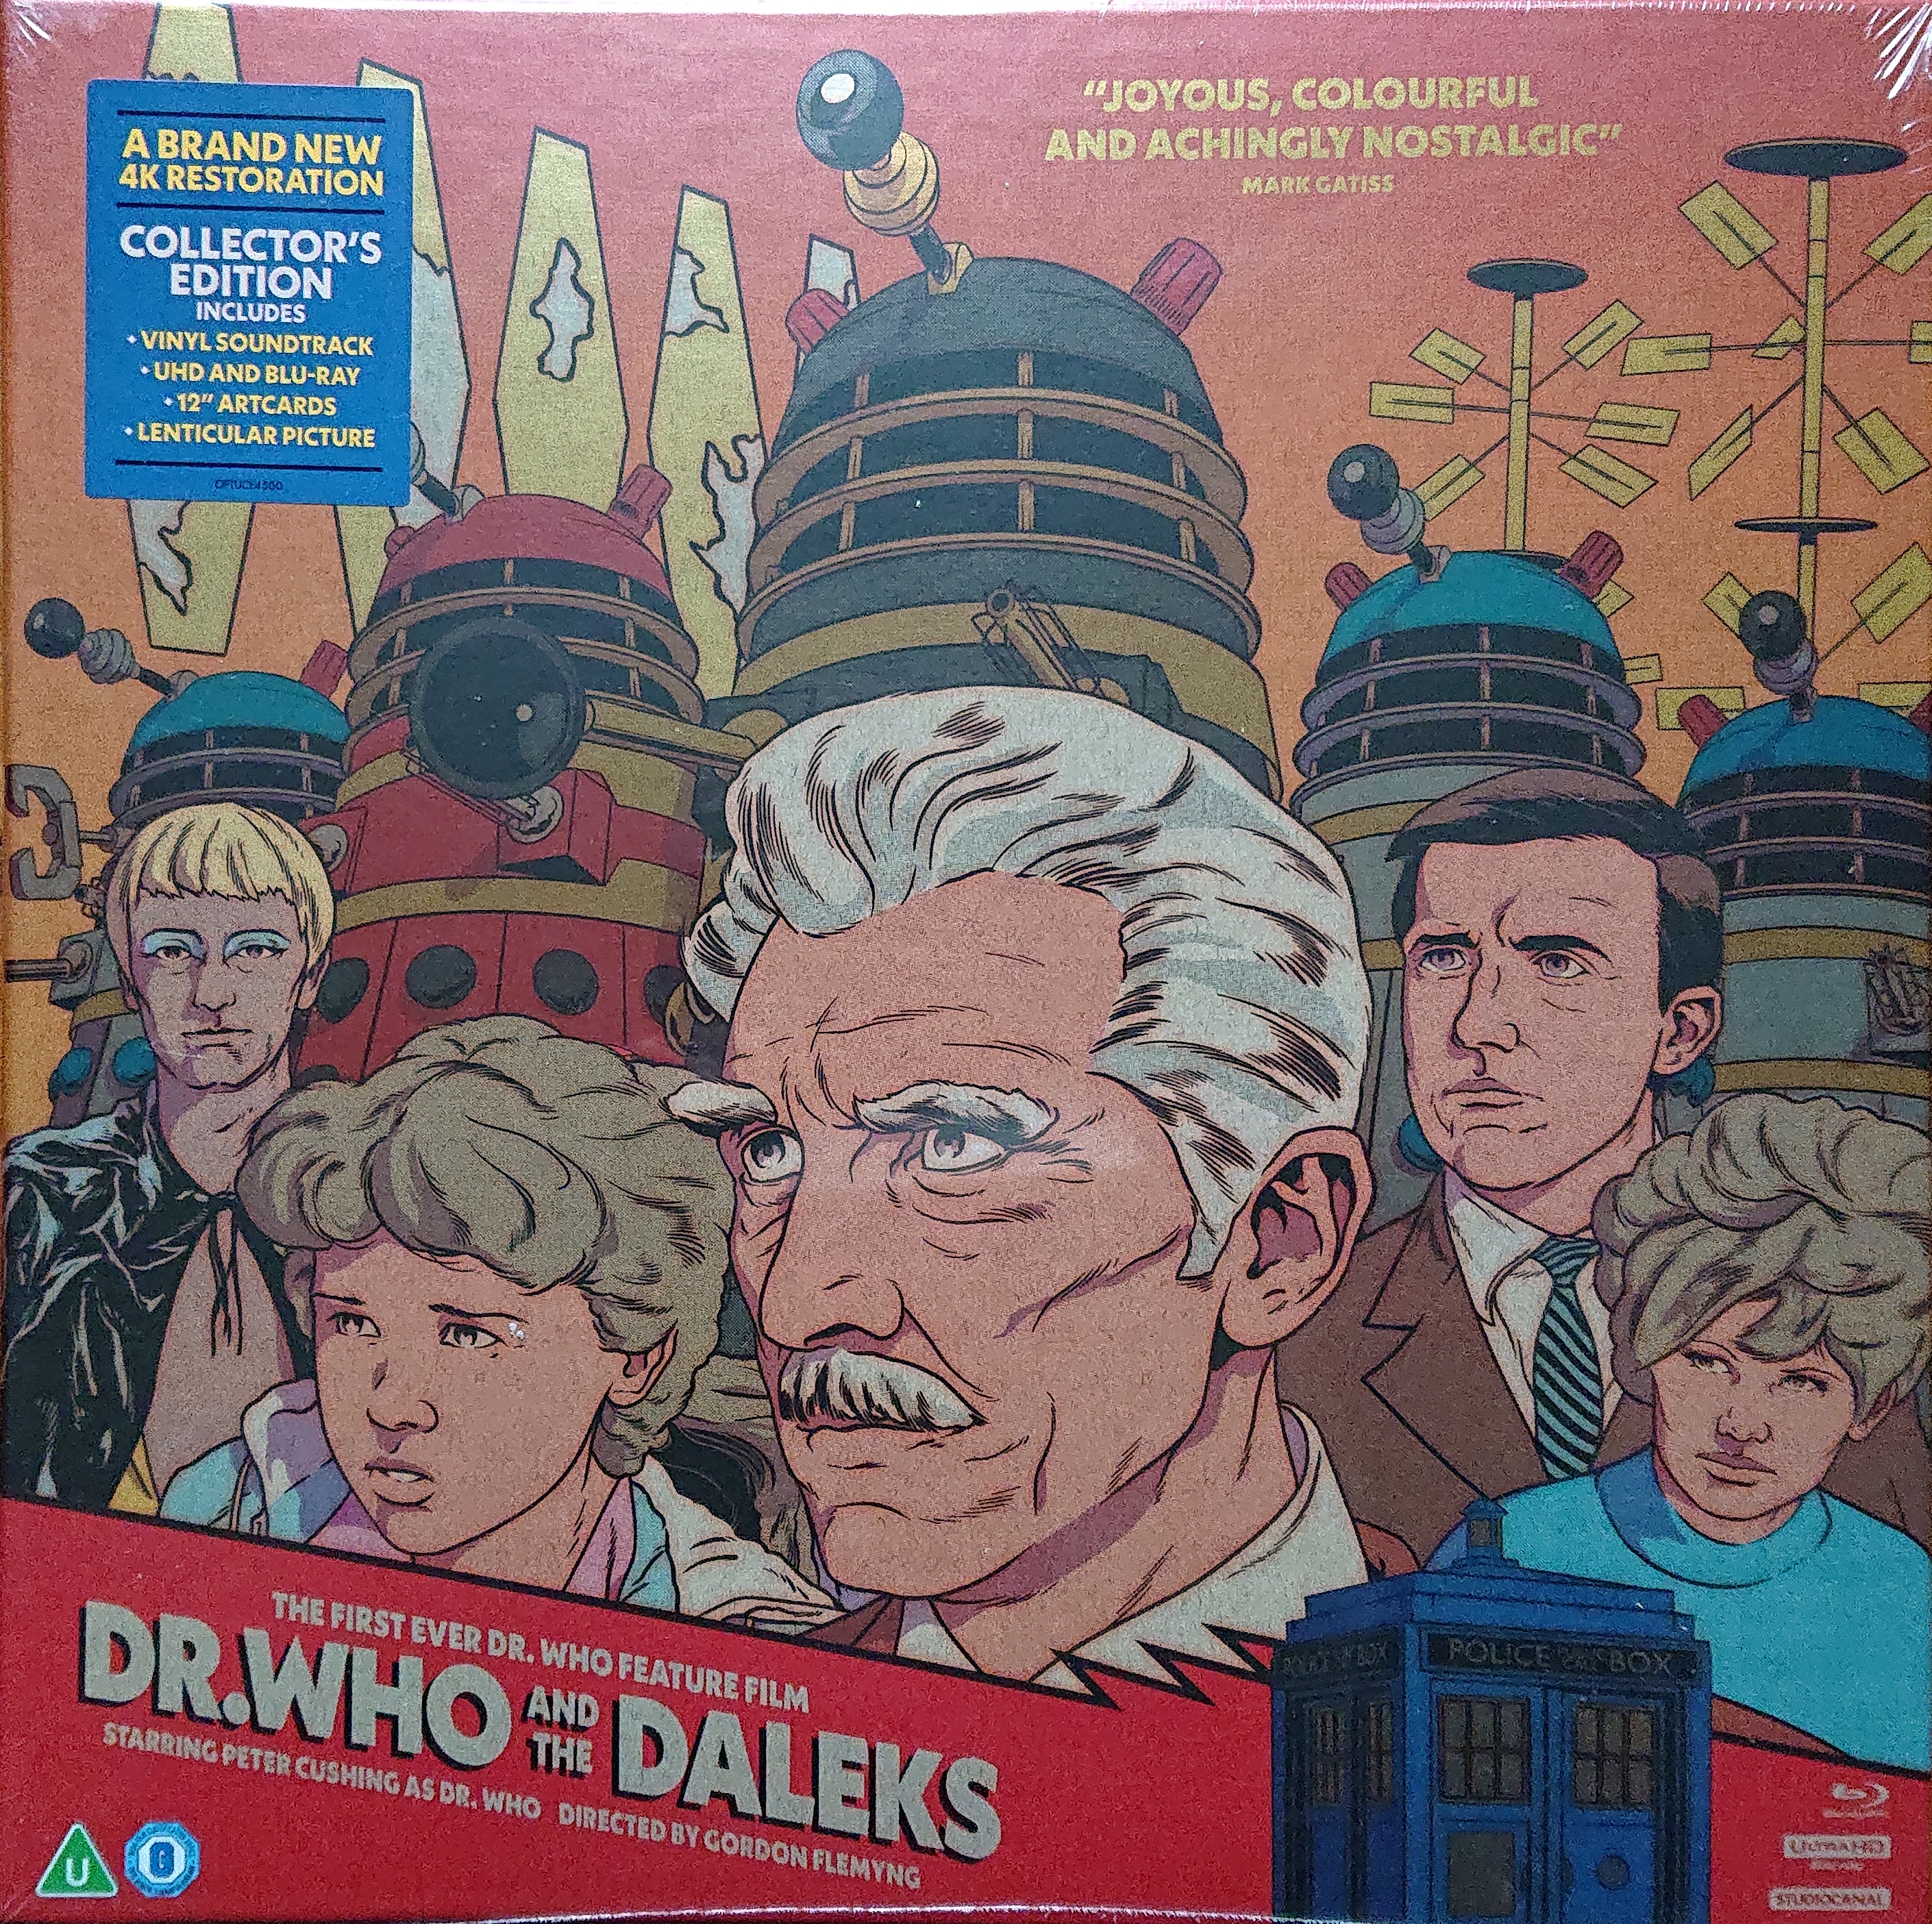 Picture of Dr. Who and the Daleks by artist Terry Nation / Milton Subotsky from the BBC albums - Records and Tapes library